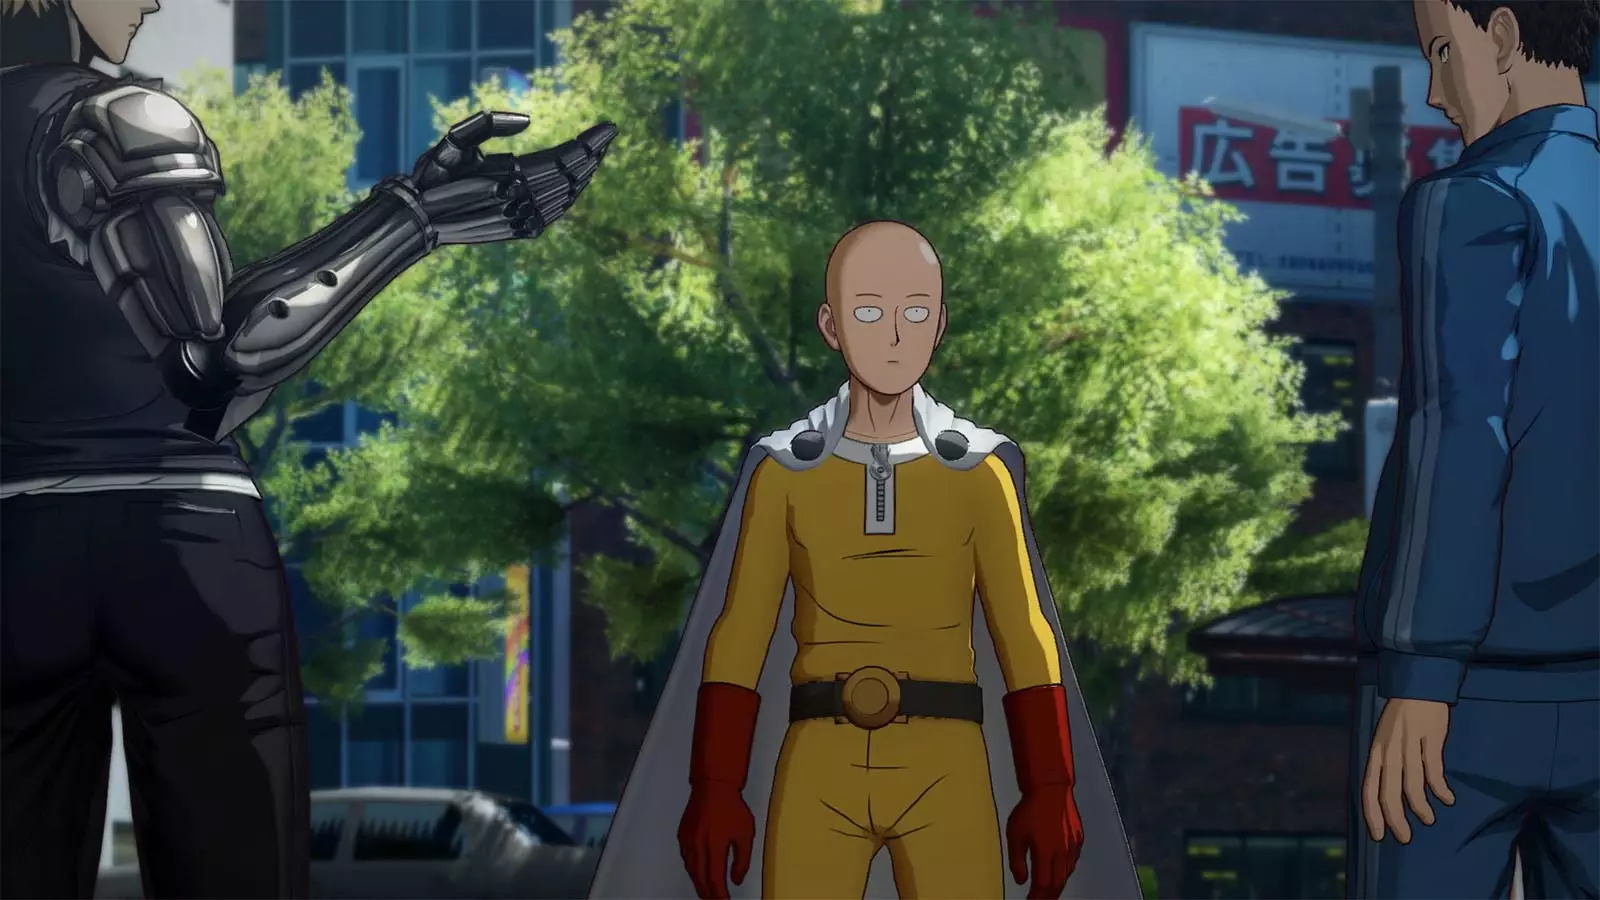 One Punch Man: A Hero Nobody Knows Character Pass - PC [Online